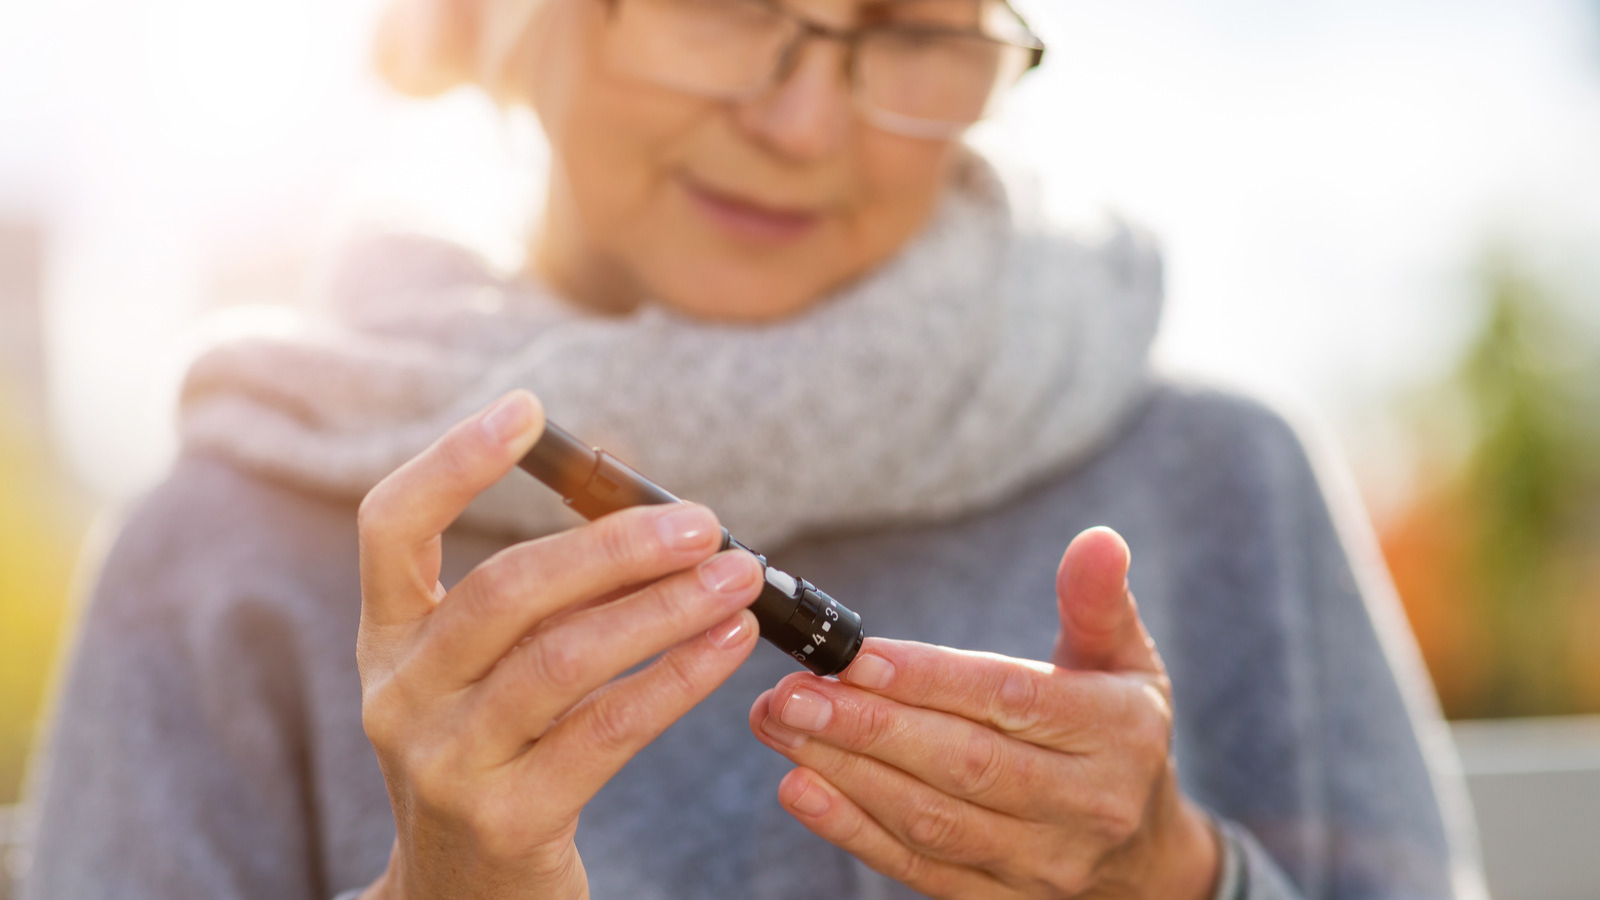 Older white woman using a device to prick her finger and test her blood sugar